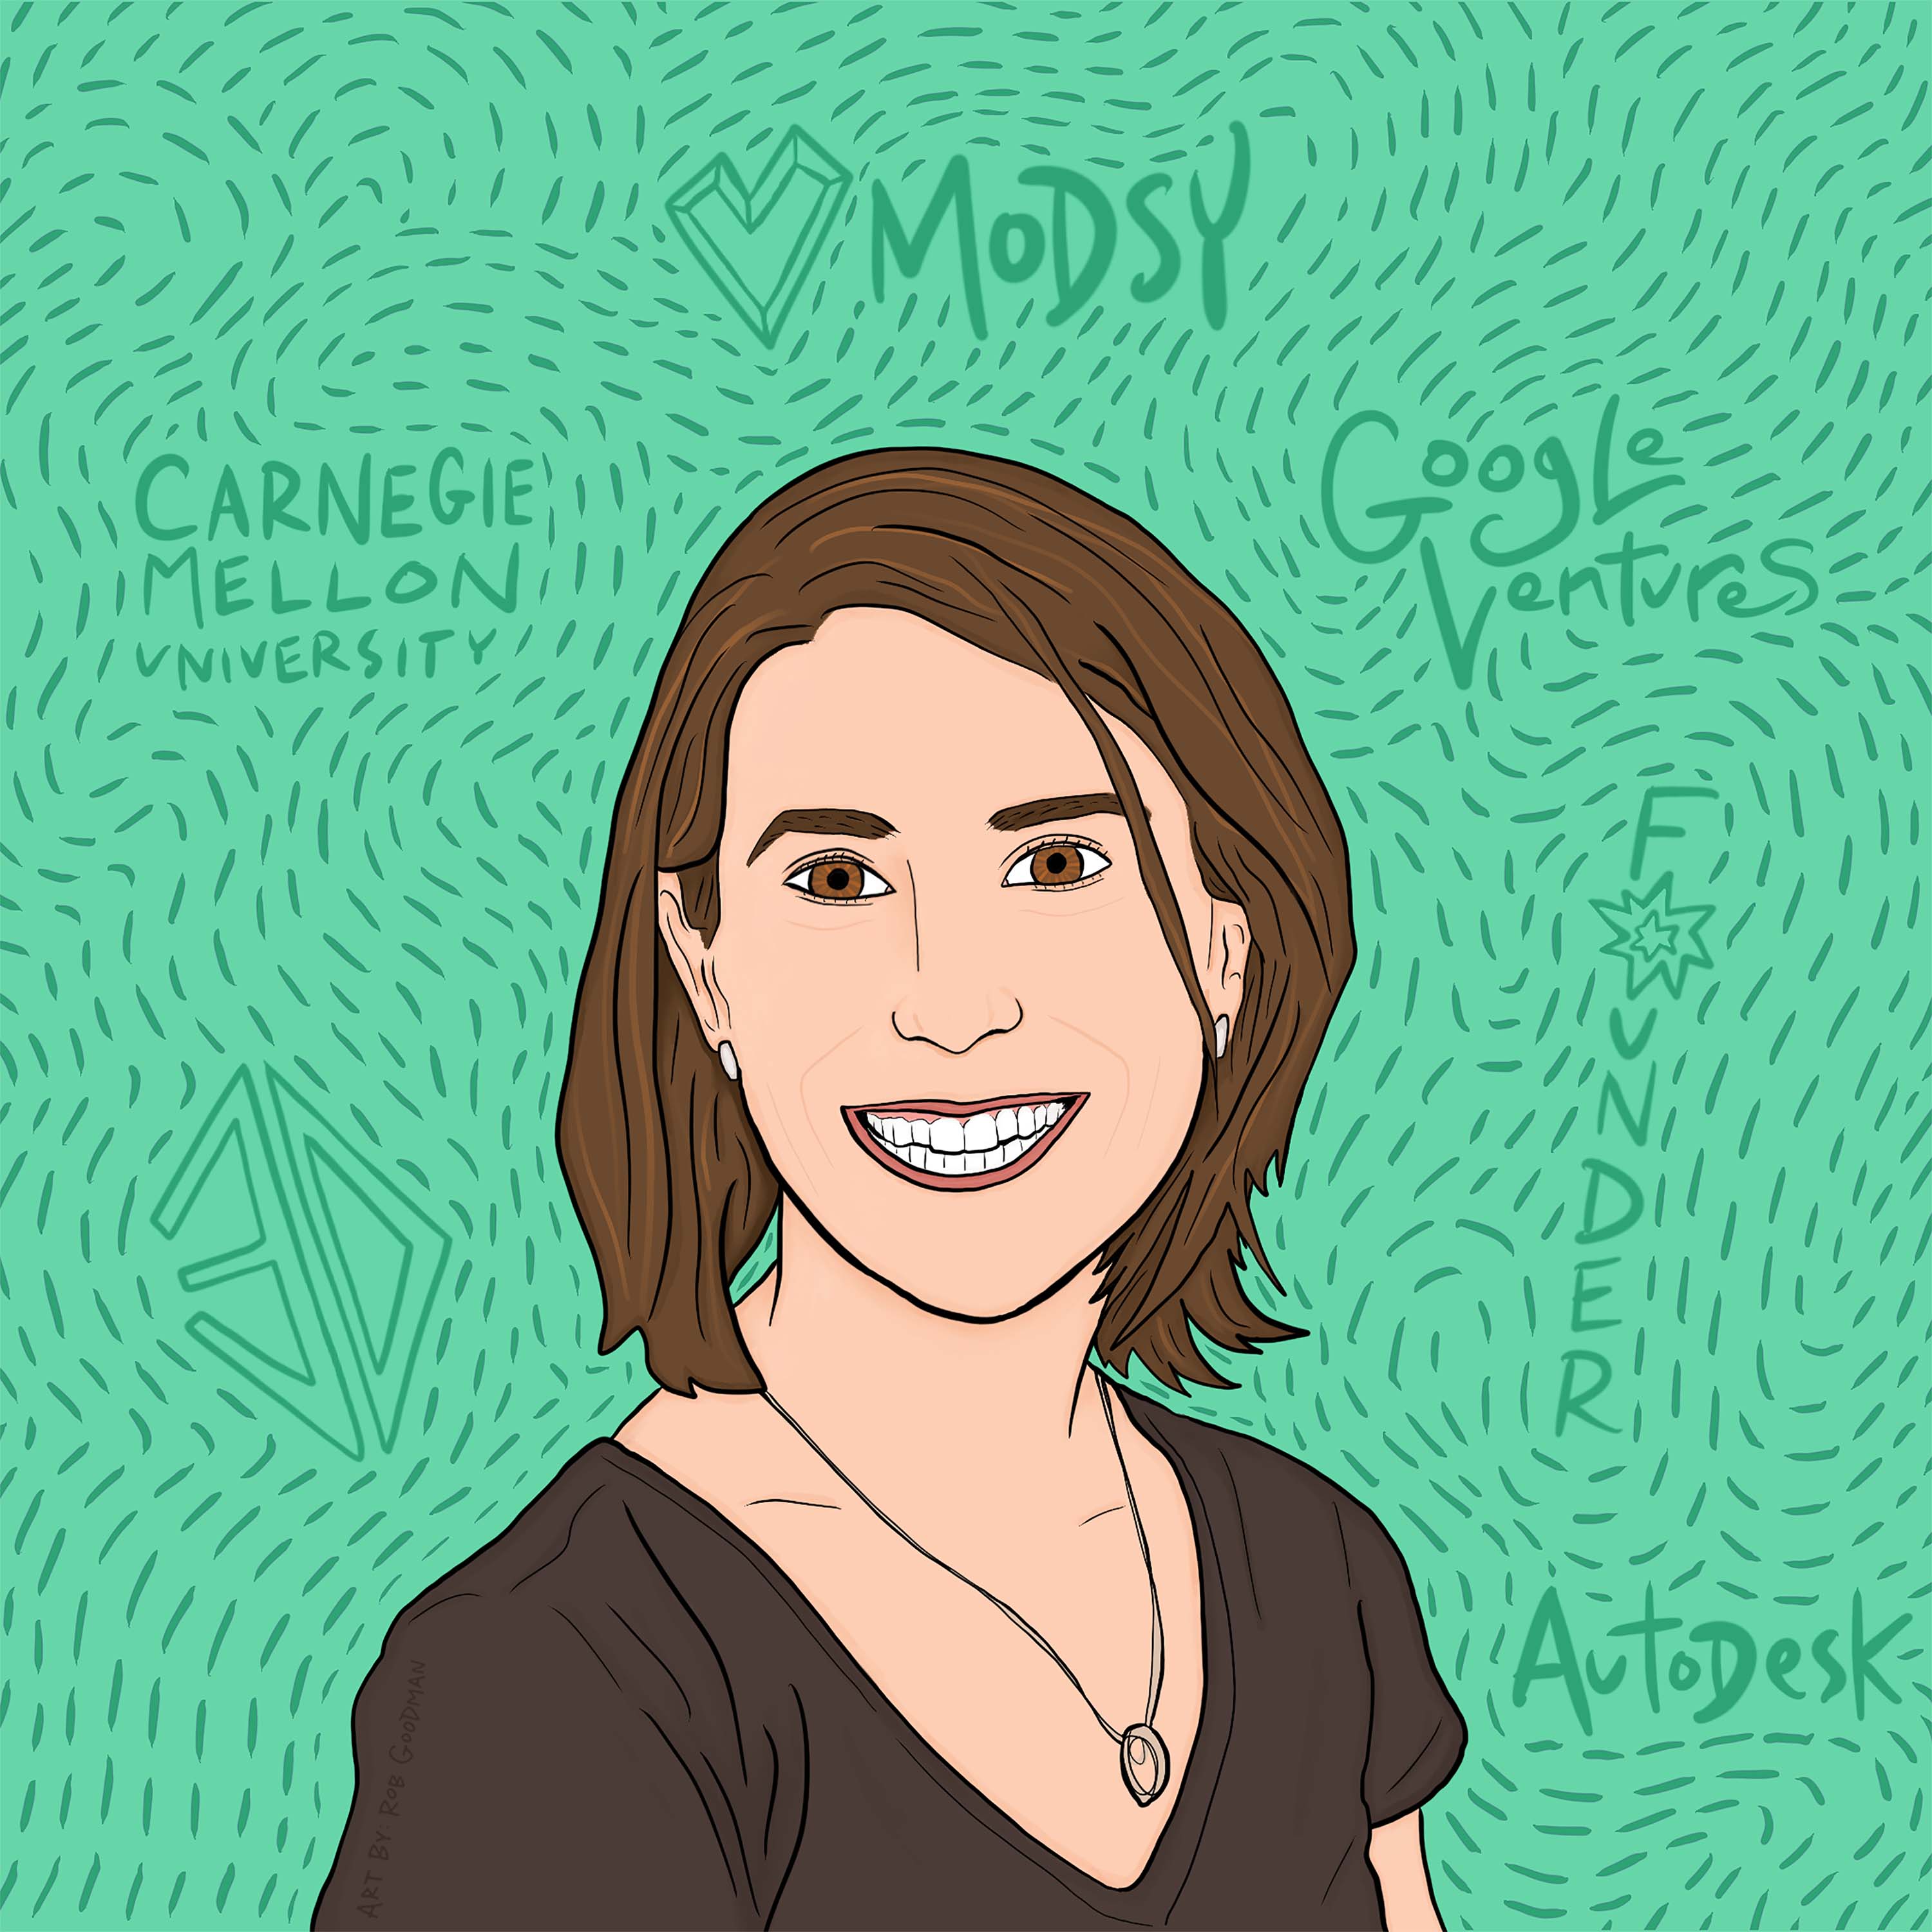 Shanna Tellerman, Founder and CEO of Modsy